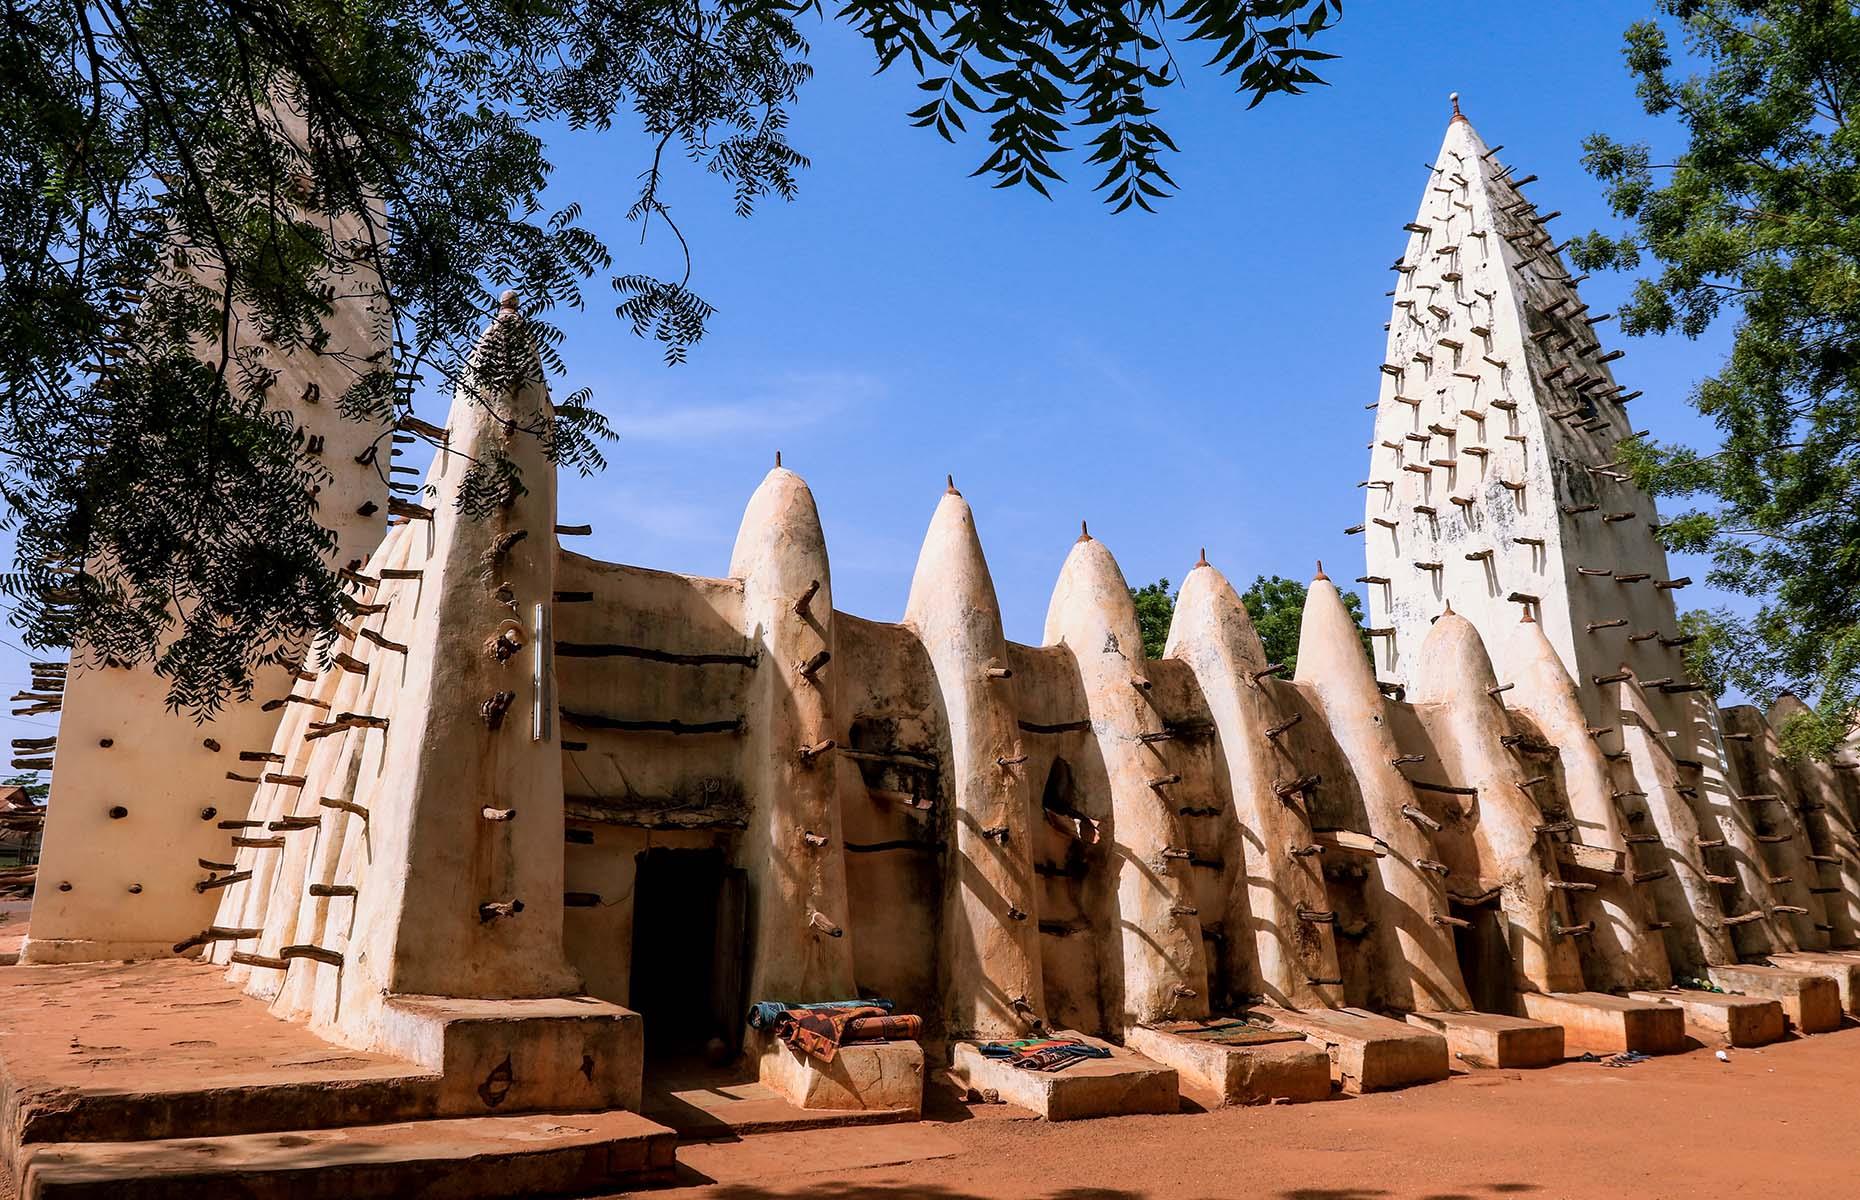 This west African country gained independence in 1960 and was then known as Upper Volta, but changed its name to Burkina Faso – which means ‘land of honest people’ – in 1984. It’s home to plenty of cultural highlights including the Grand Mosque at Bobo Dioulasso (pictured), a striking structure that’s actually made of whitewashed mud with logs sticking out at an angle, and the Loropeni ruins; the country’s first UNESCO World Heritage Site.